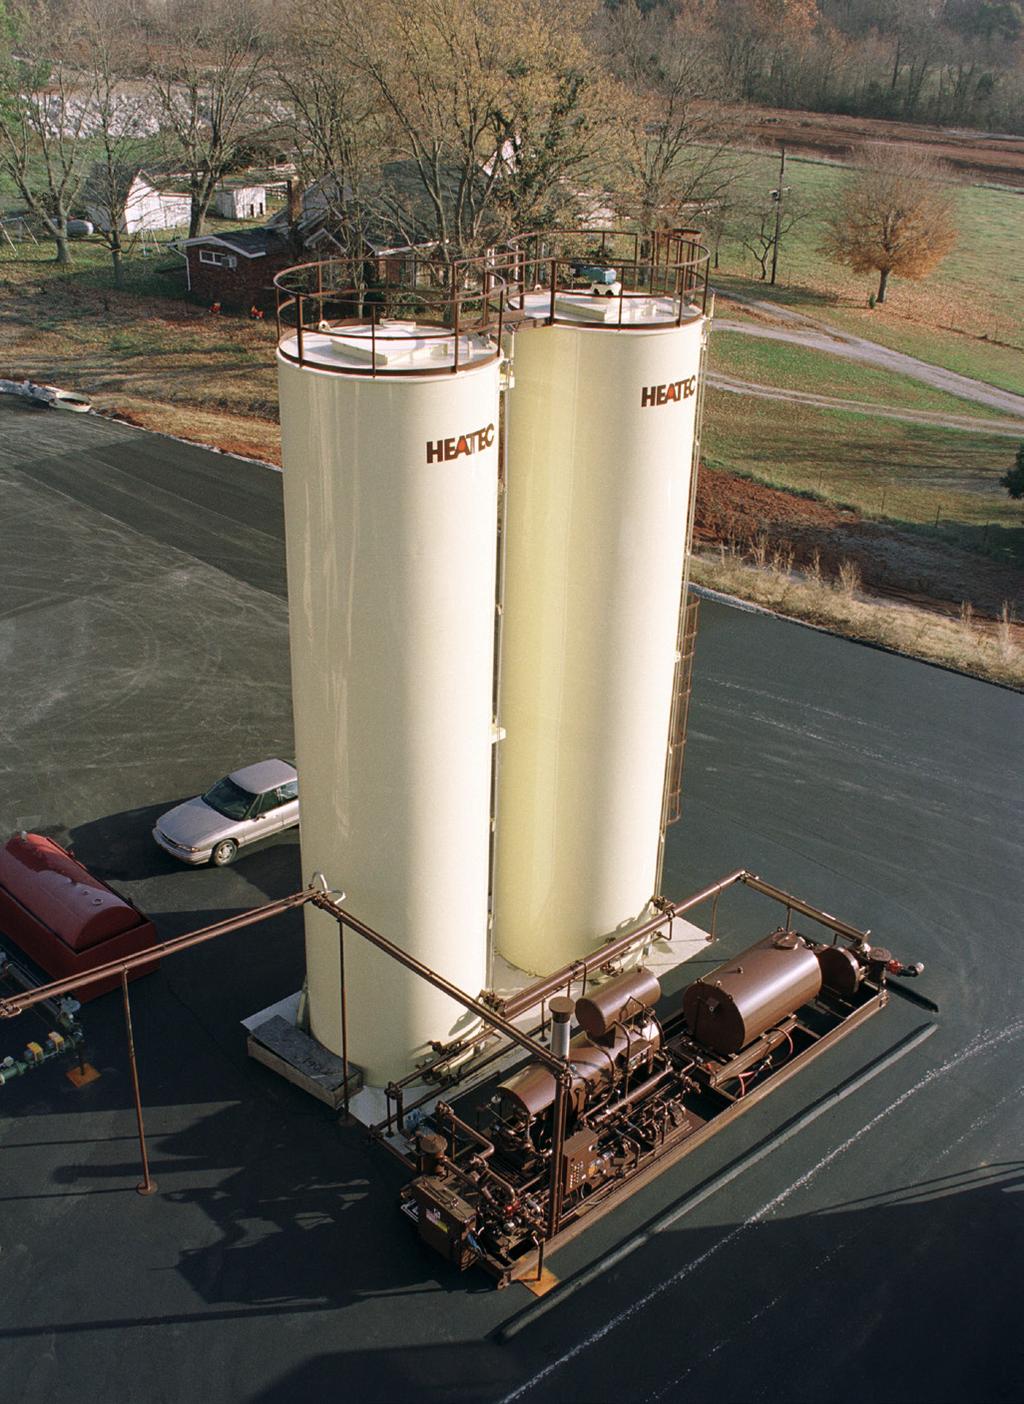 It applies to Heatec vertical tanks with capacities ranging from 10,000 to 35,000 gallons. The sensors are optional equipment for Heatec tanks. The sensors indicate levels of asphalt in the tanks.